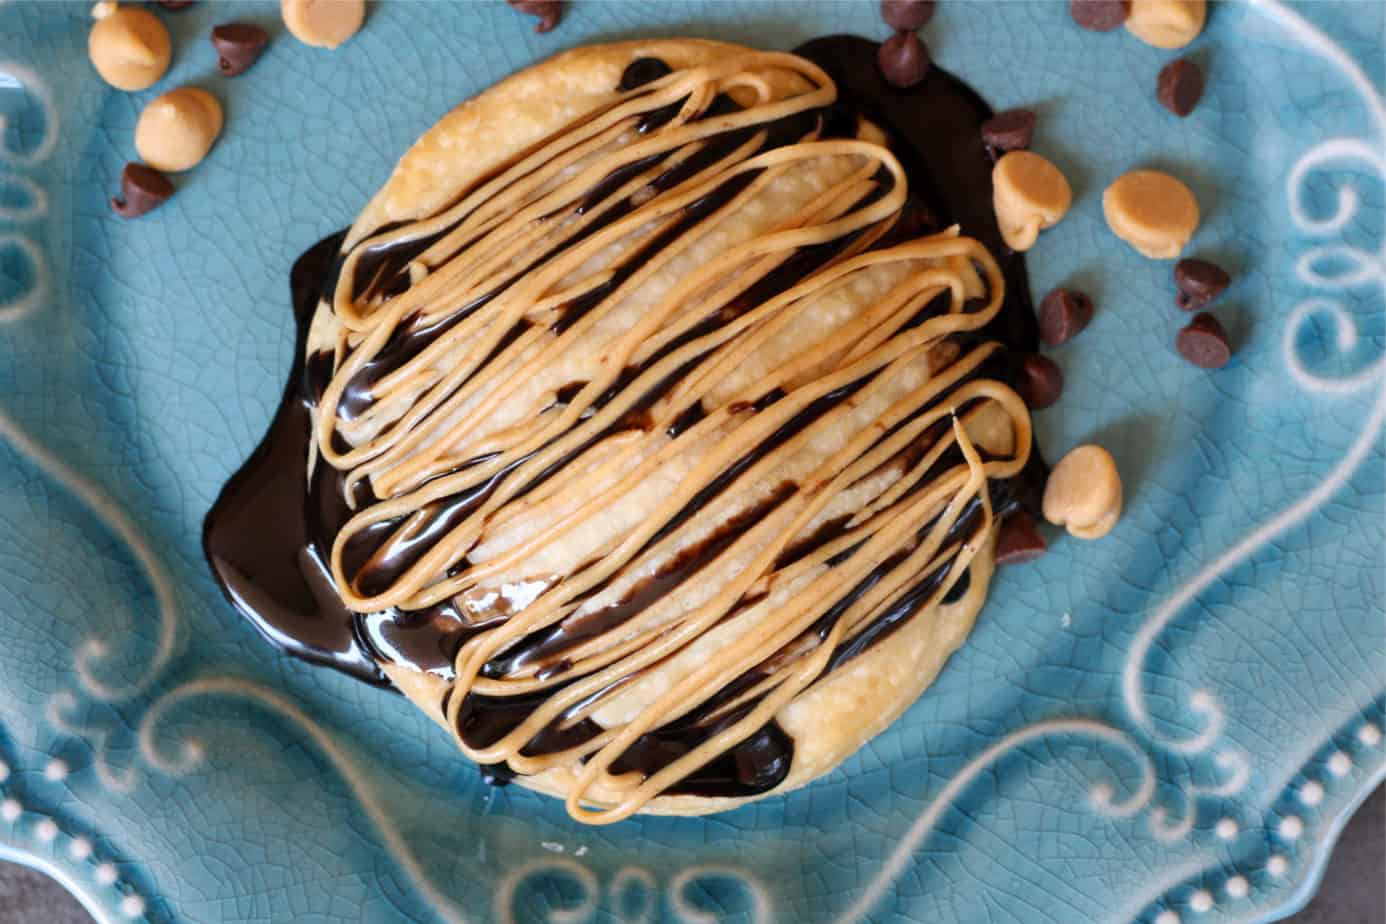 Air Fryer Peanut Butter Chocolate Pastries – Or Bake in the Oven!